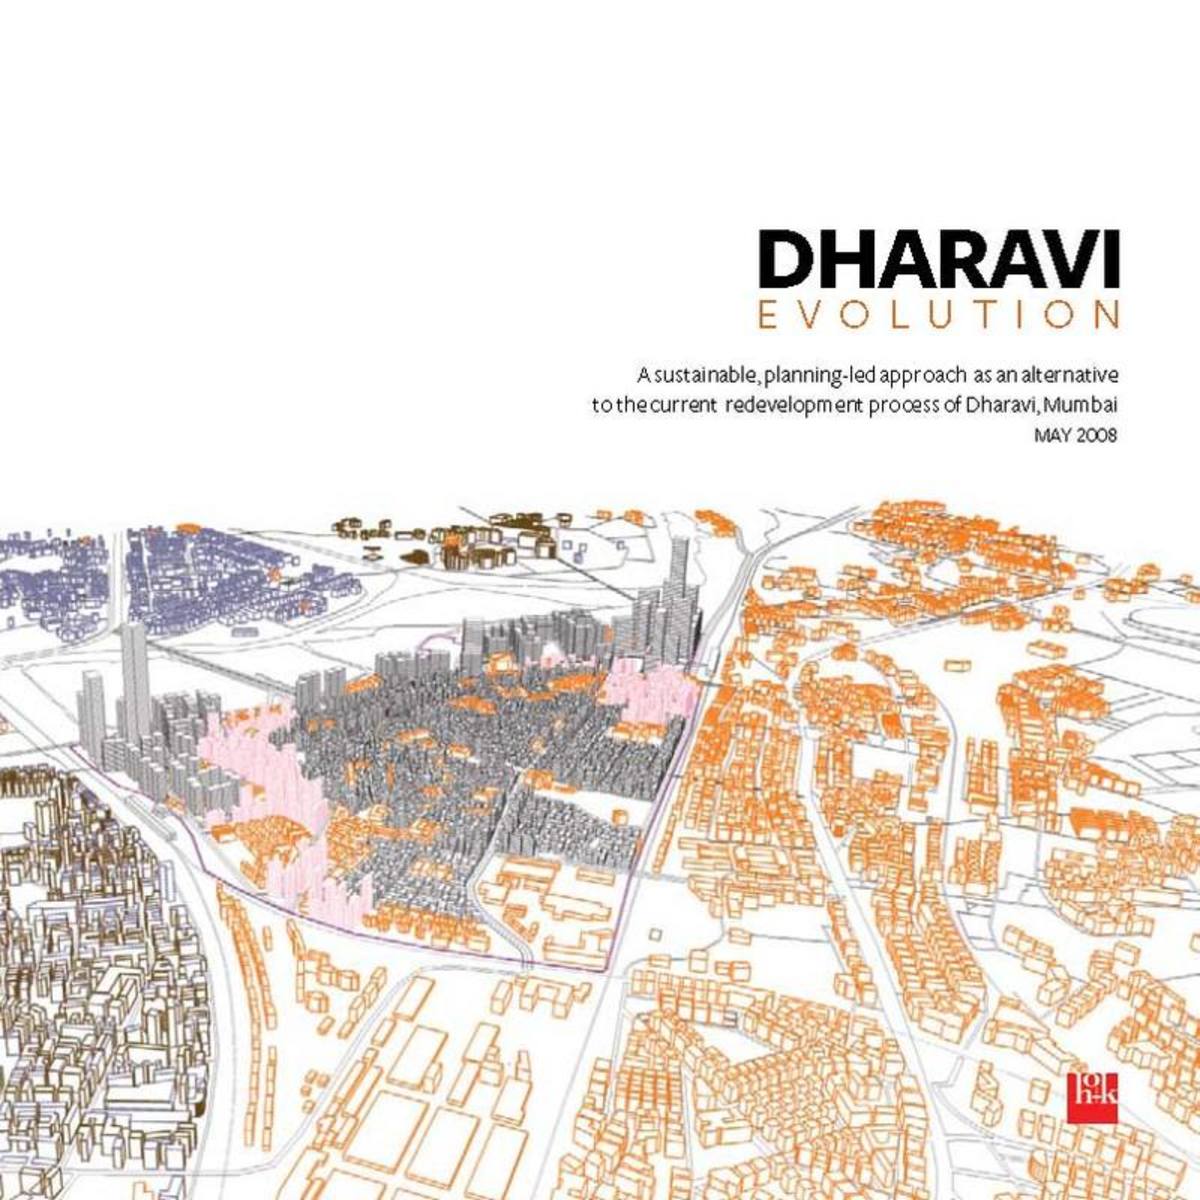 Pressures from the government to redevelop the slum are growing. Potentially Dharavi could look like this (above and below).